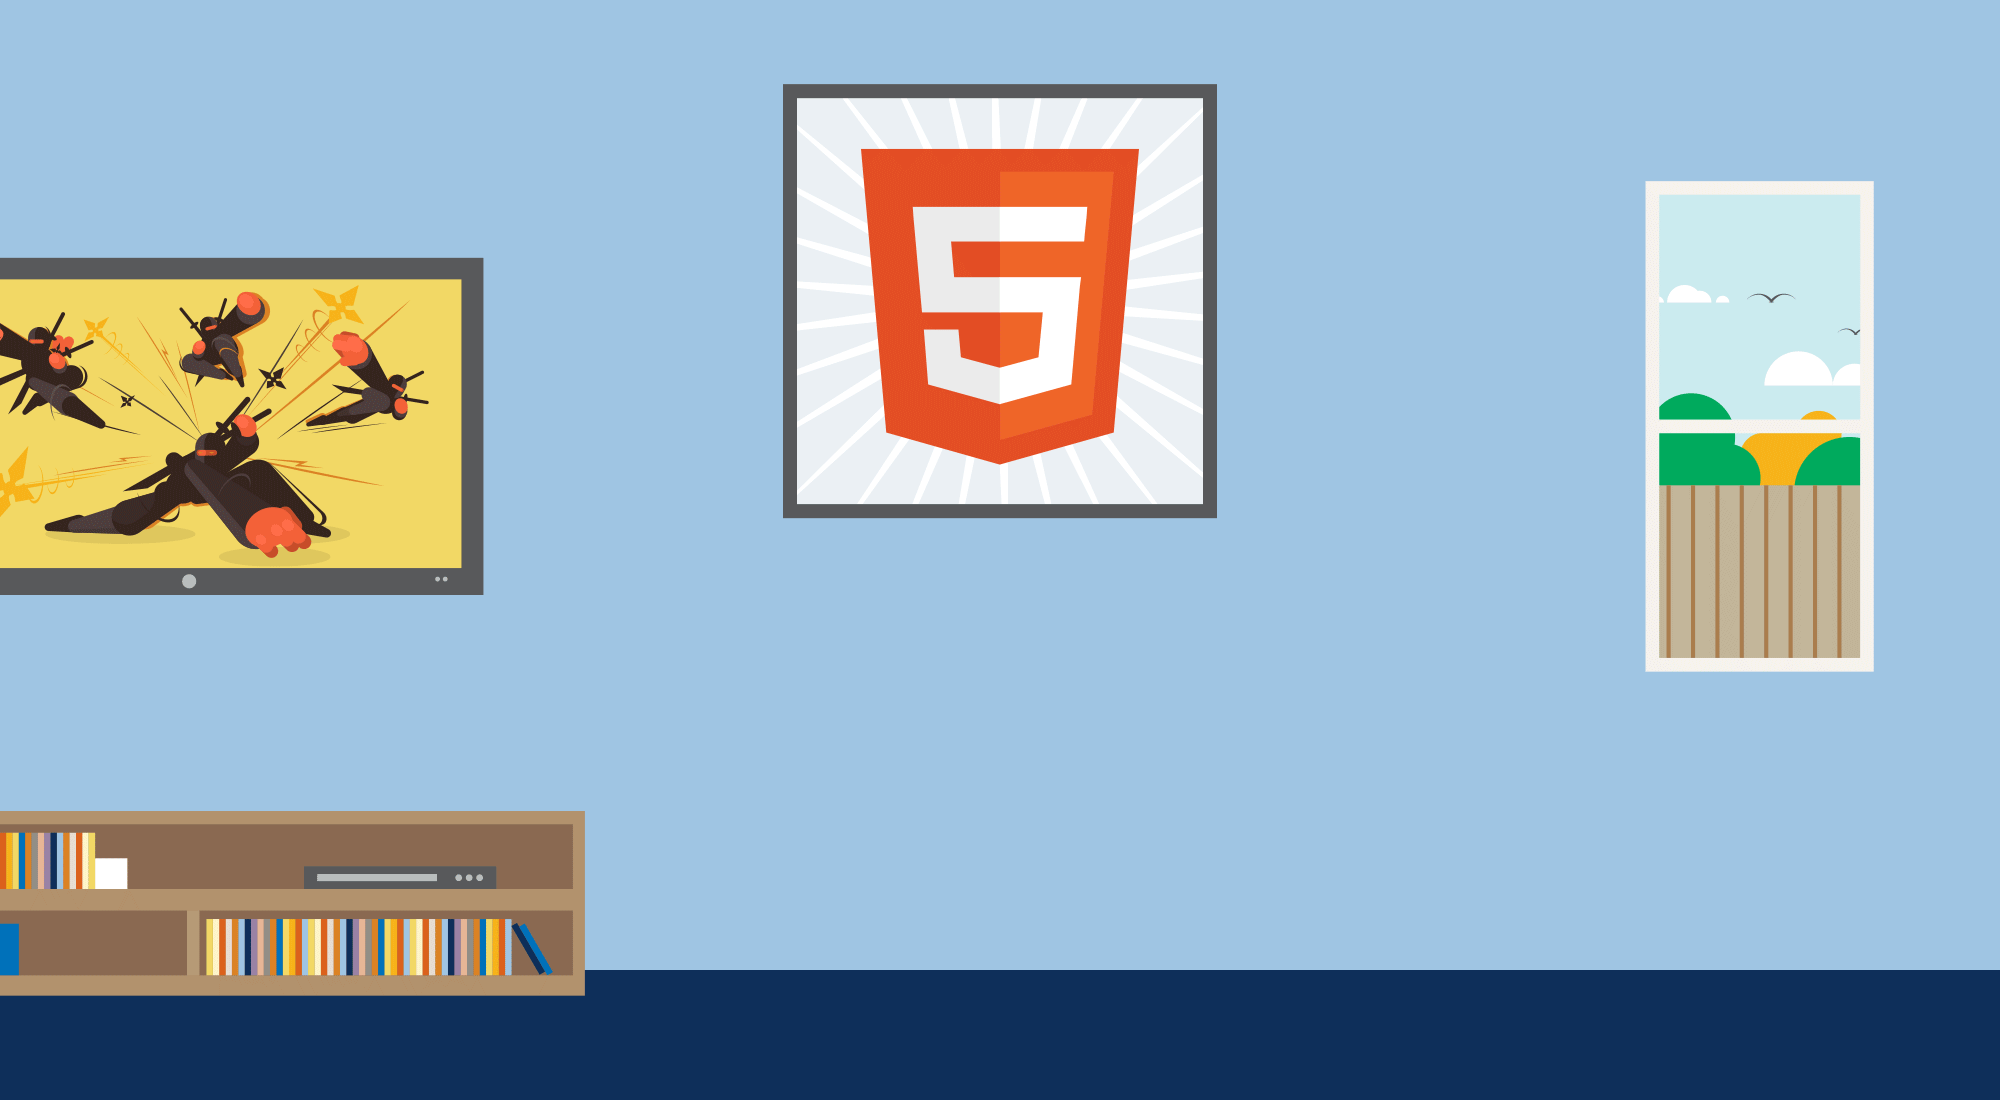 How to Draw and Animate Objects using HTML5 Canvas and JavaScript